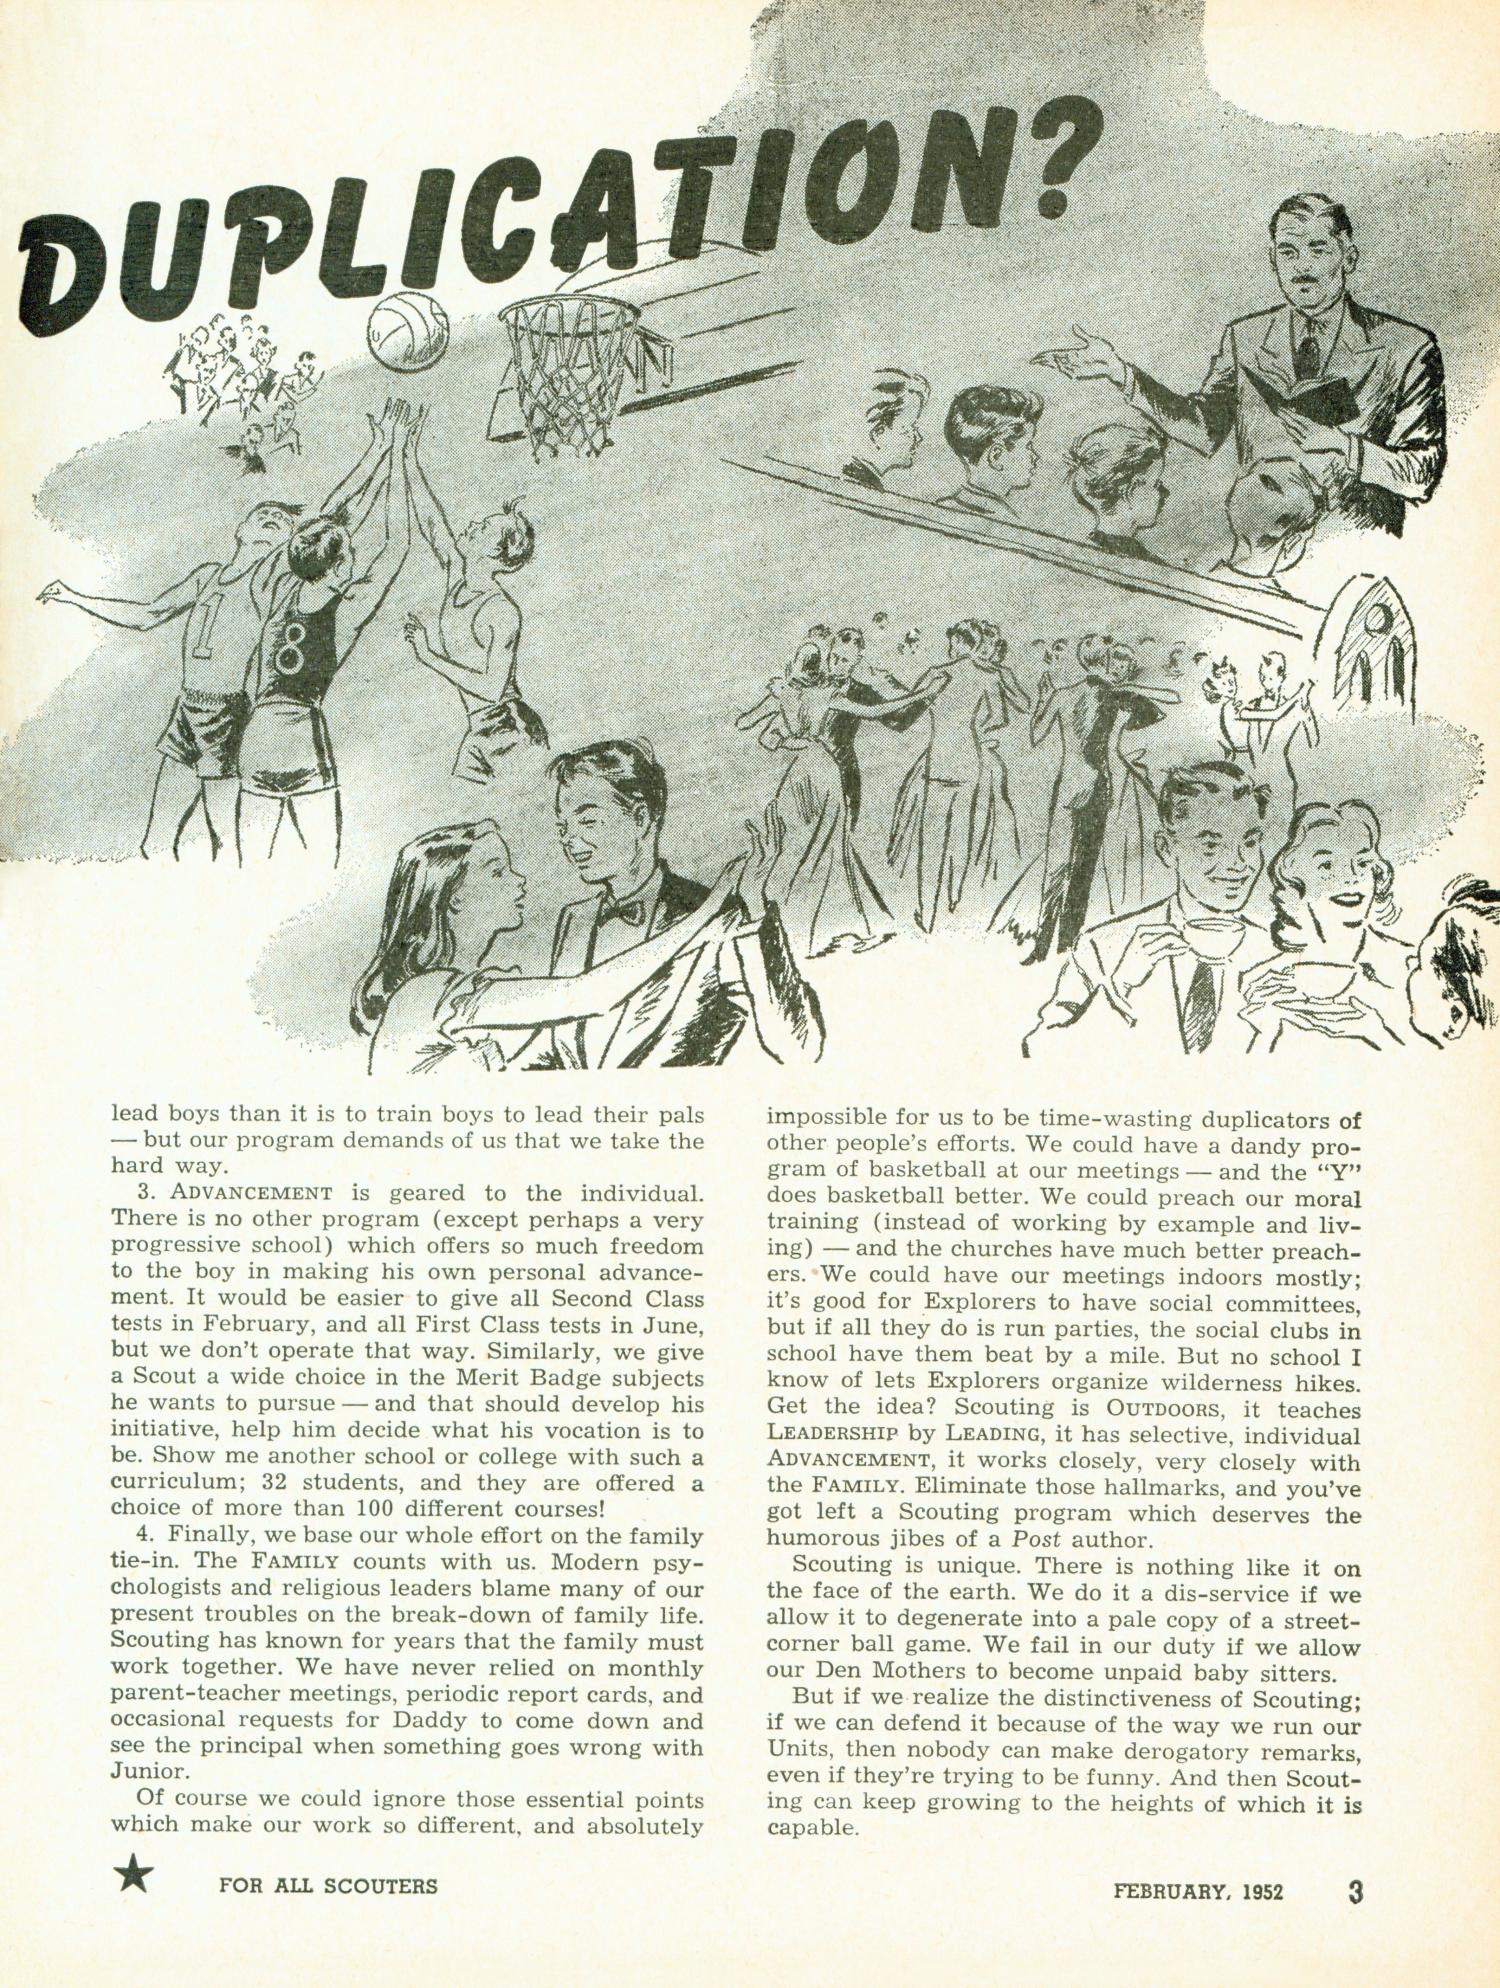 Scouting, Volume 40, Number 2, February 1952
                                                
                                                    3
                                                